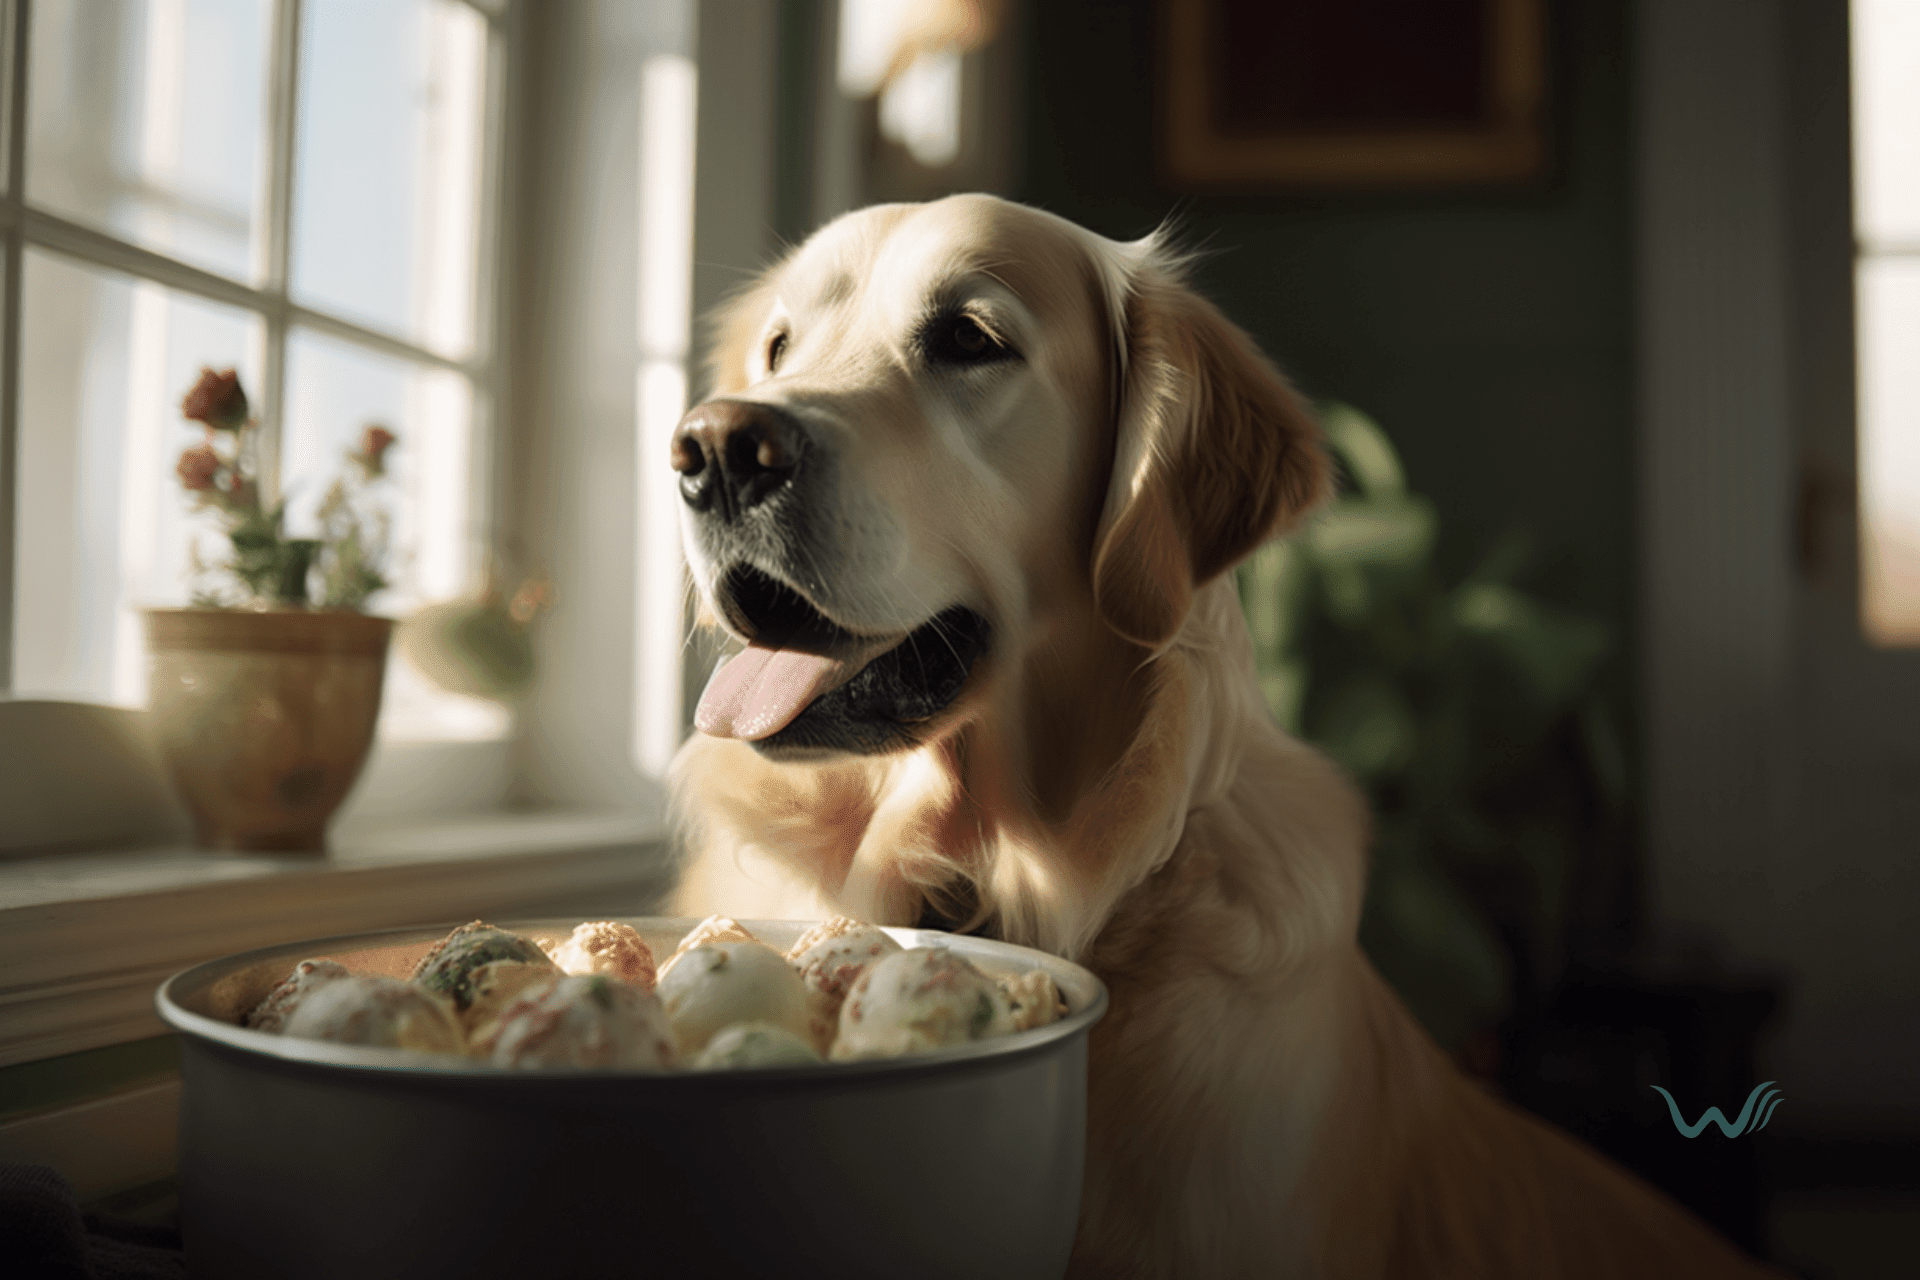 5 pet friendly ice cream recipes for your service animal